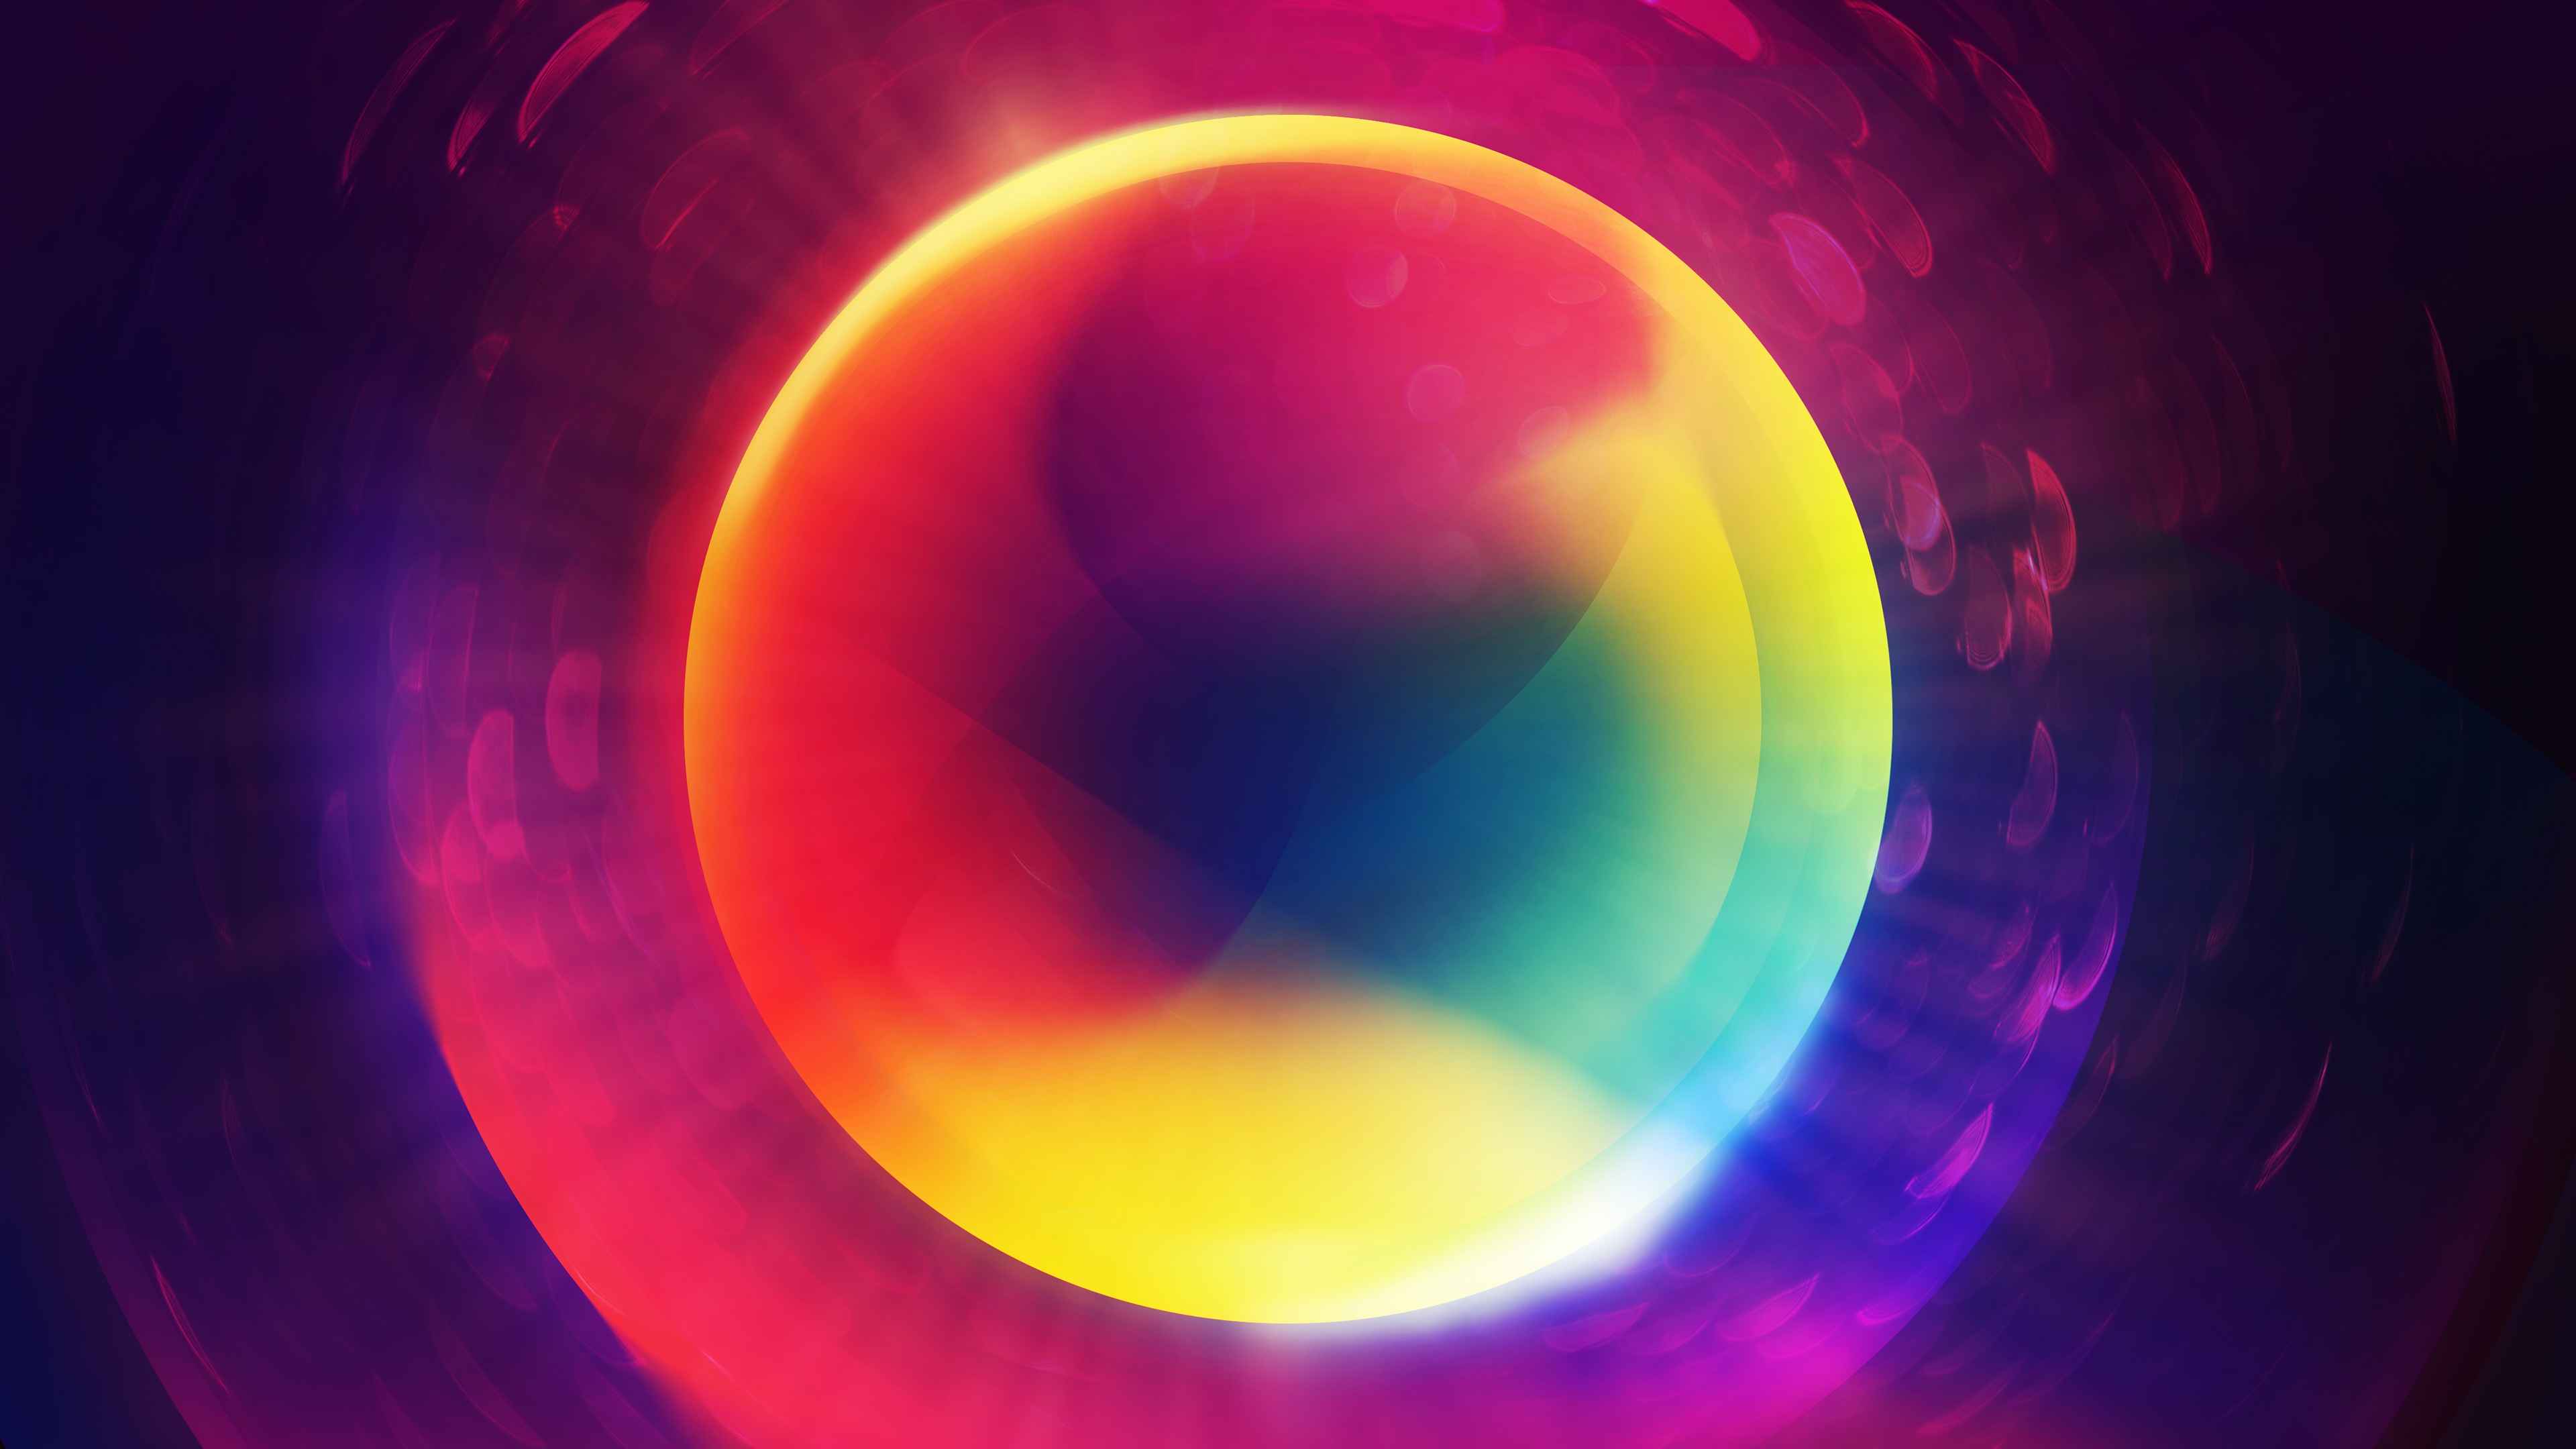 4k wallpaper,light,circle,graphics,space,colorfulness